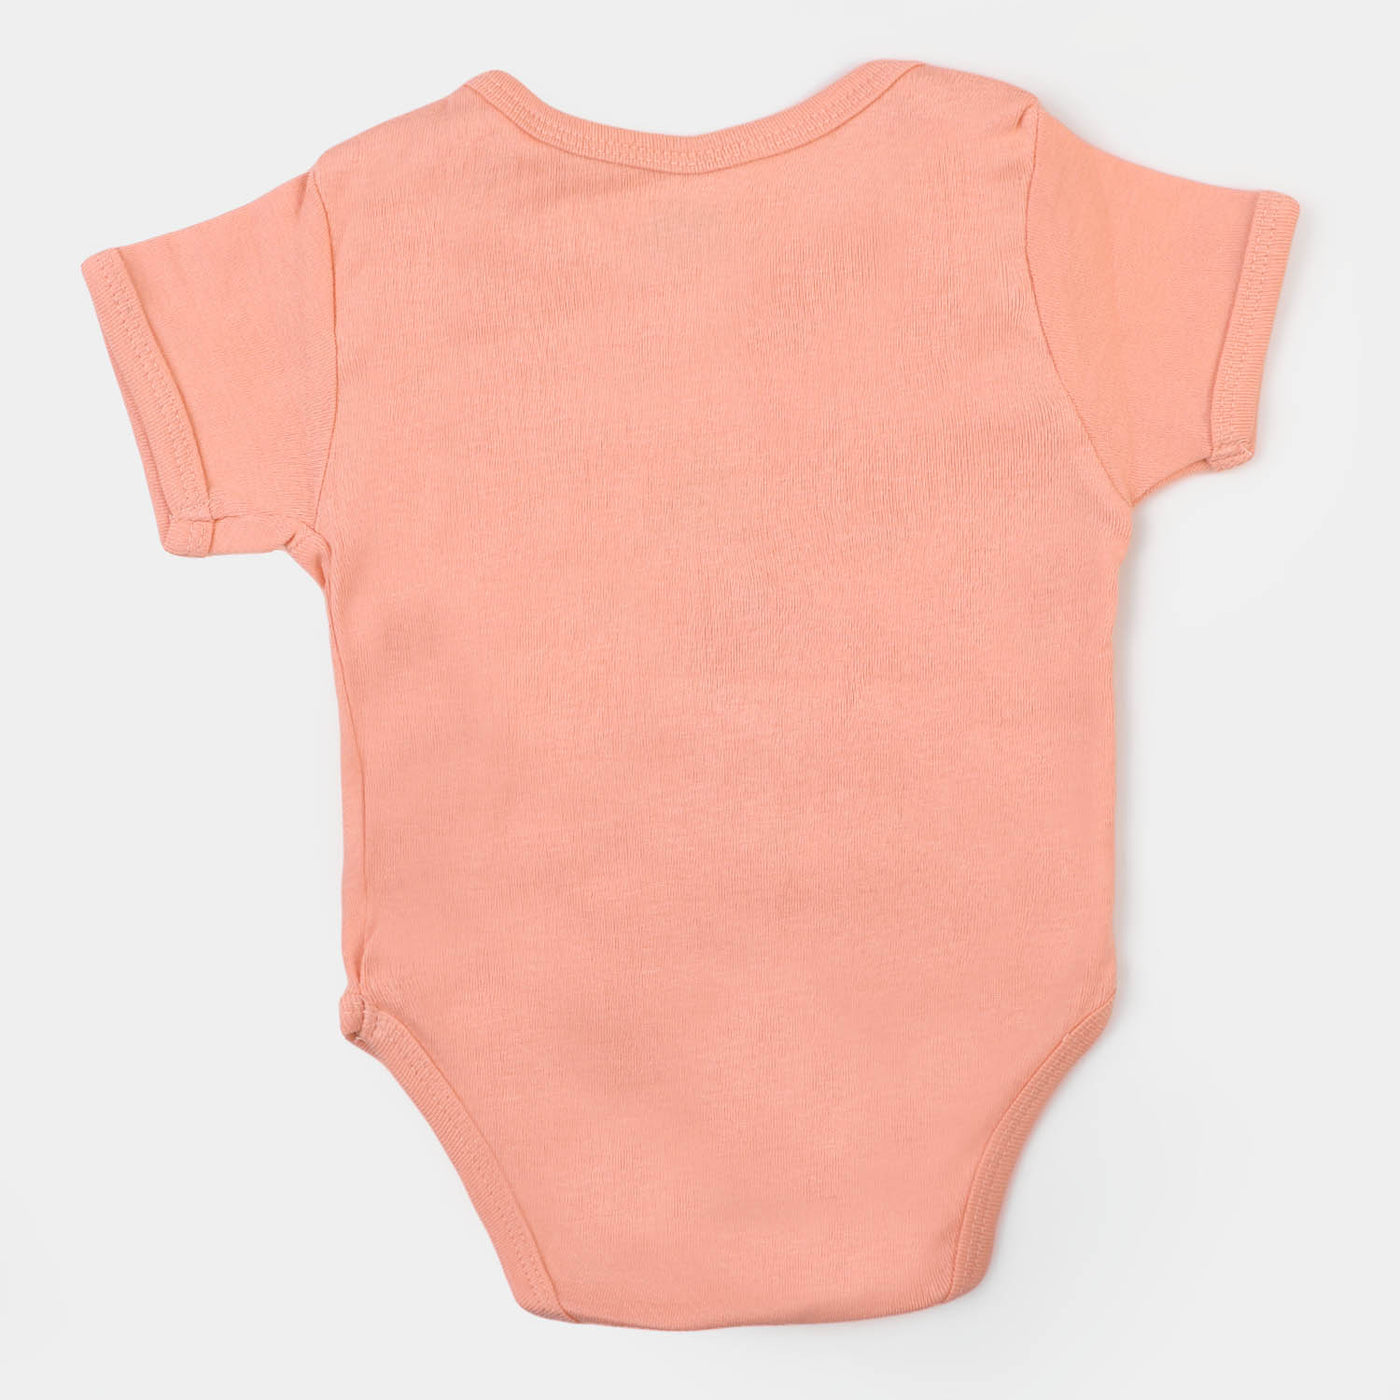 Infant Boys Romper Make Today Awesome - Peach